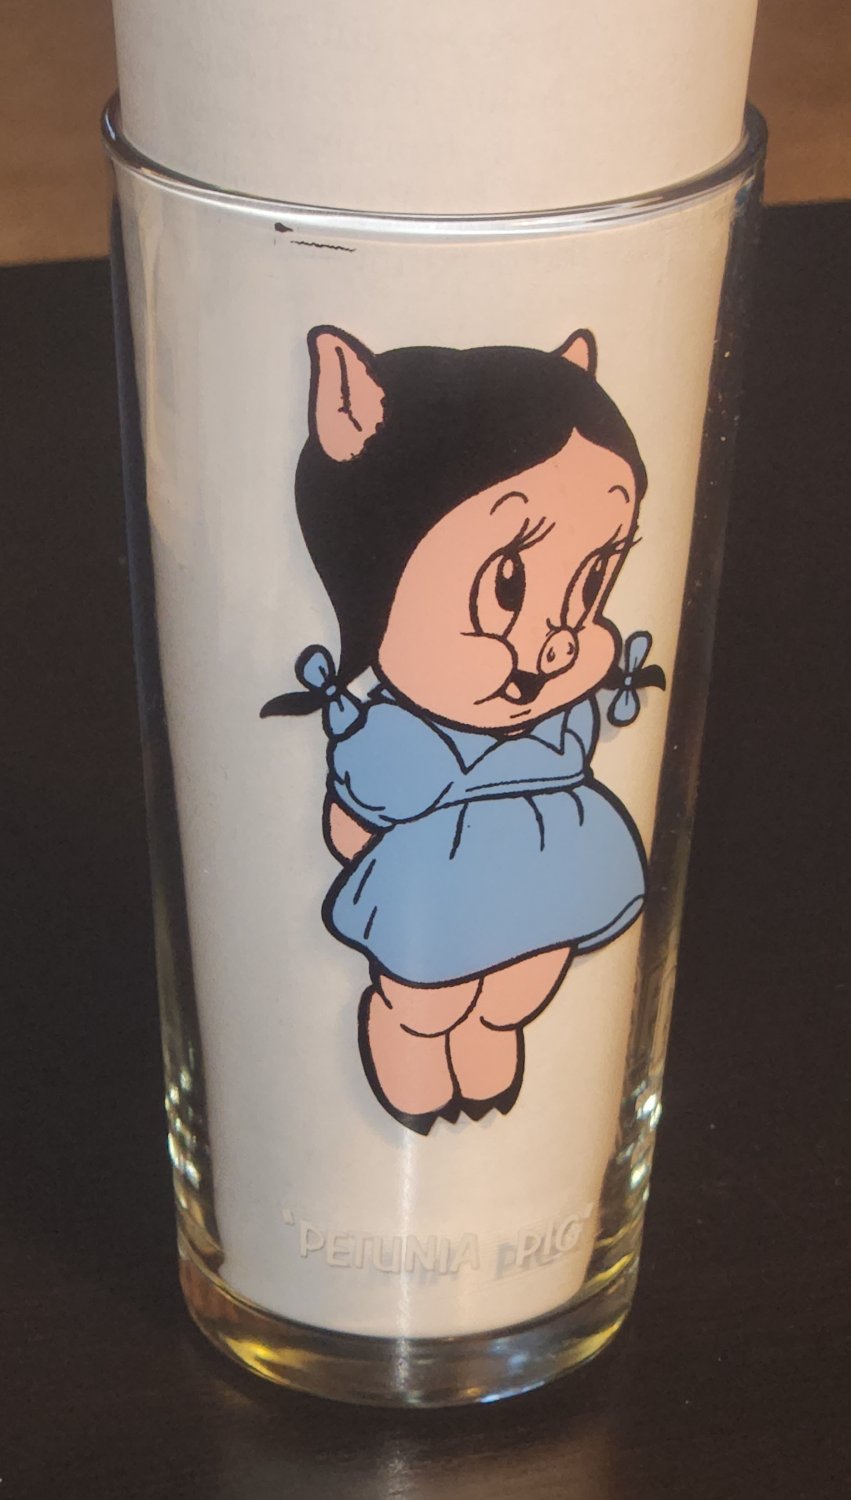 Petunia Pig Pepsi Collector Series Drinking Glass 1973